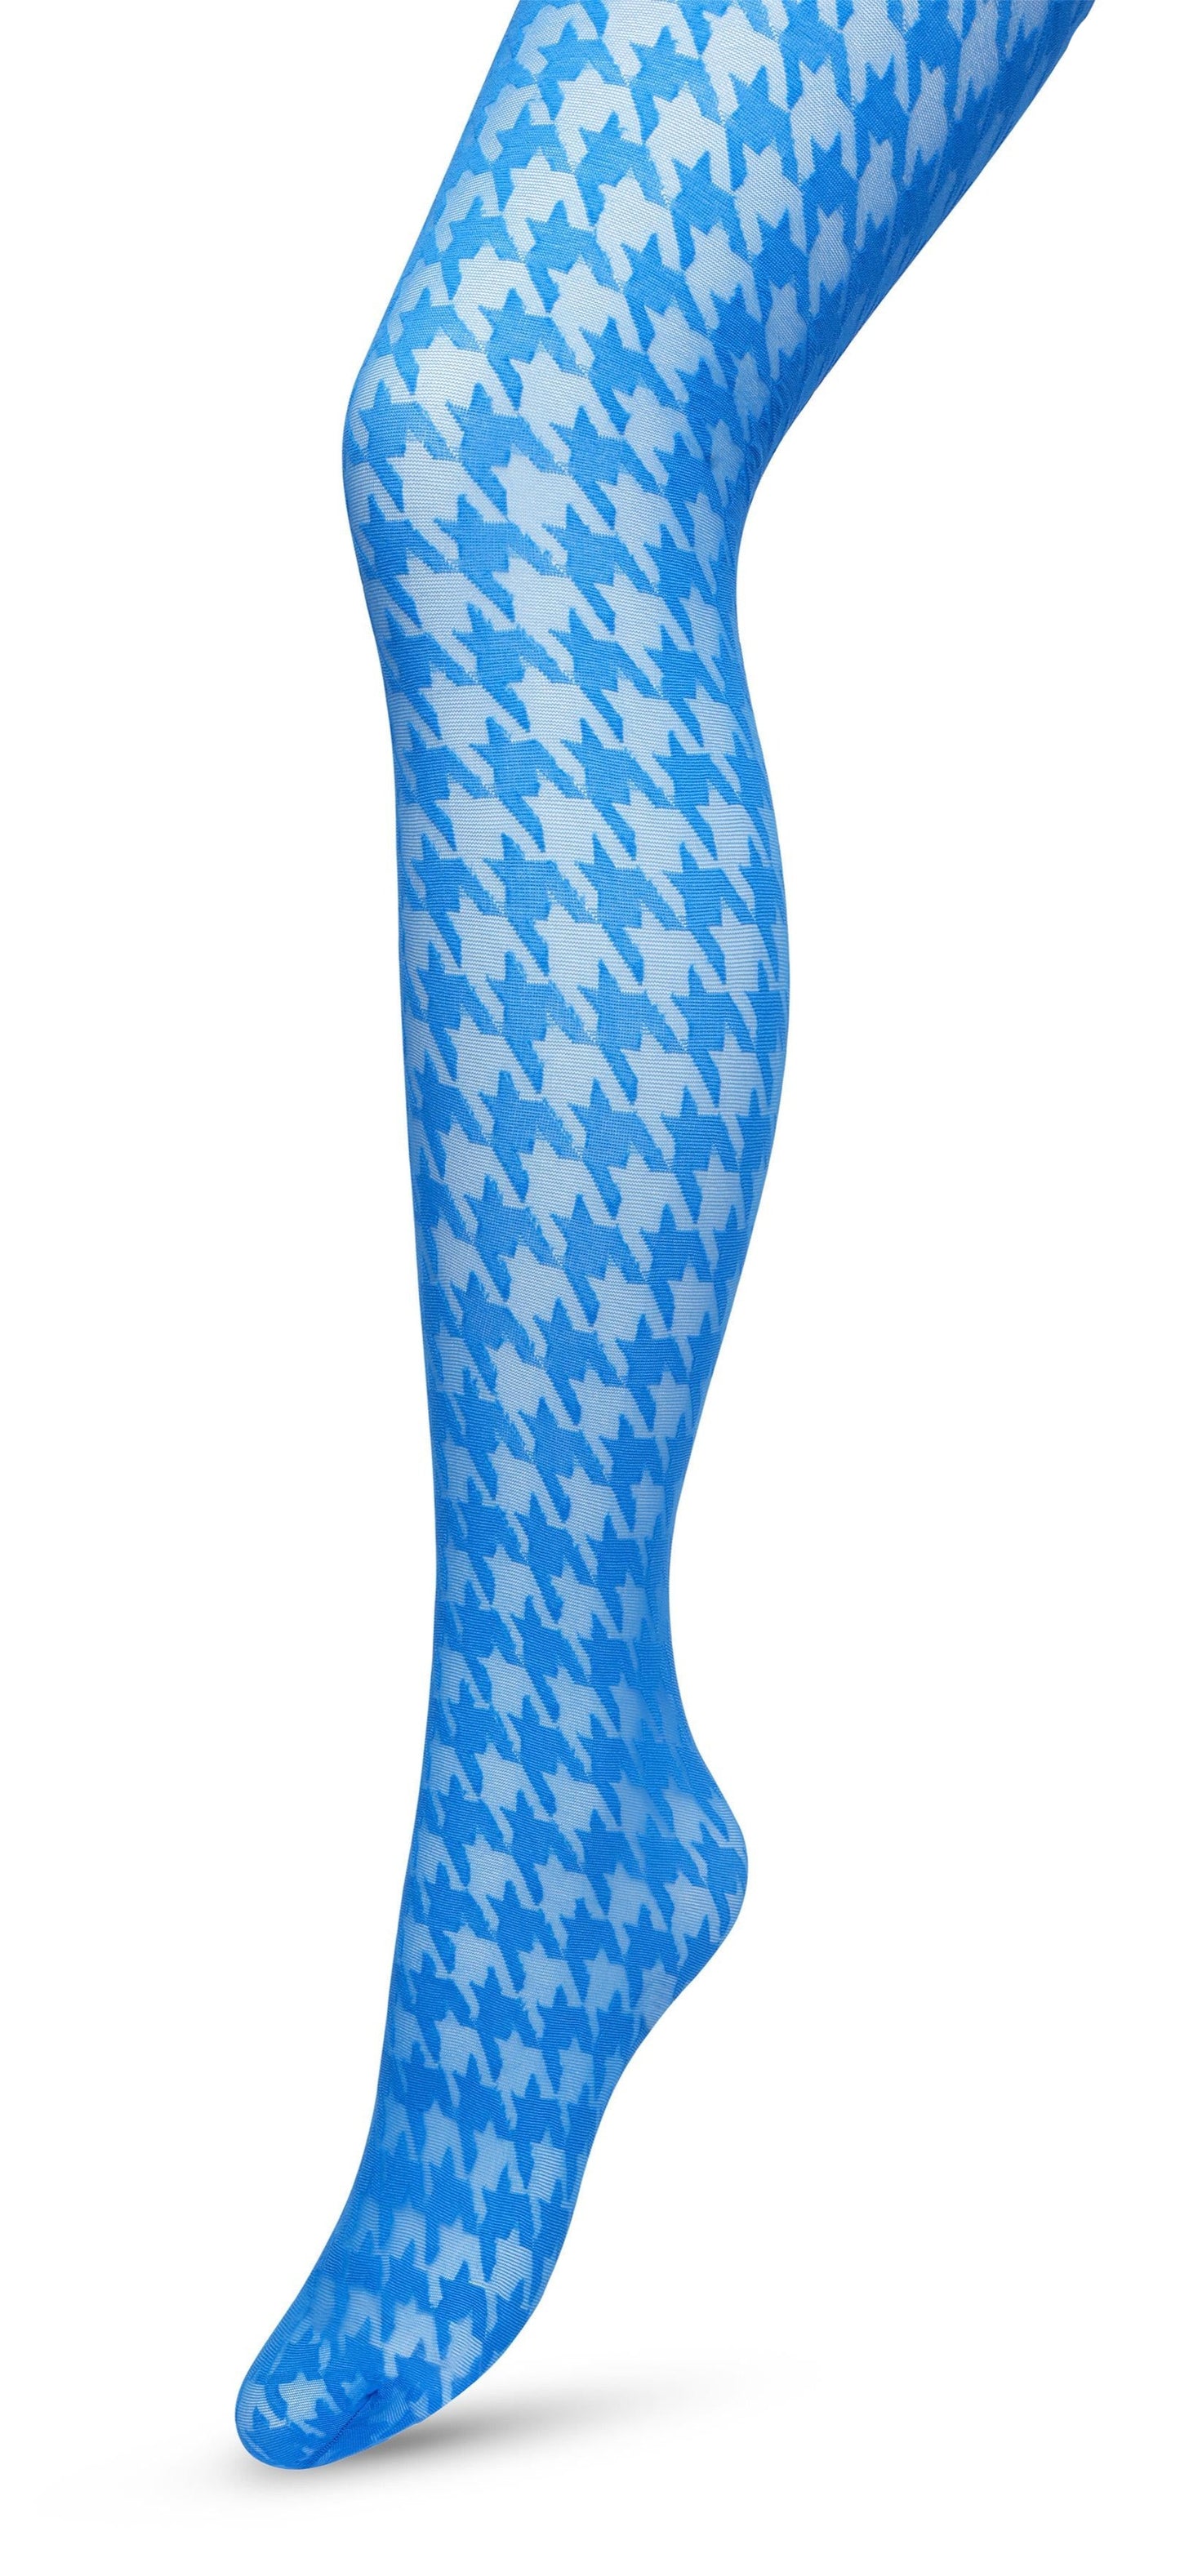 Bonnie Doon BP221903 Houndstooth Tights - Sheer fashion tights with a woven opaque dogtooth pattern in bright electric blue